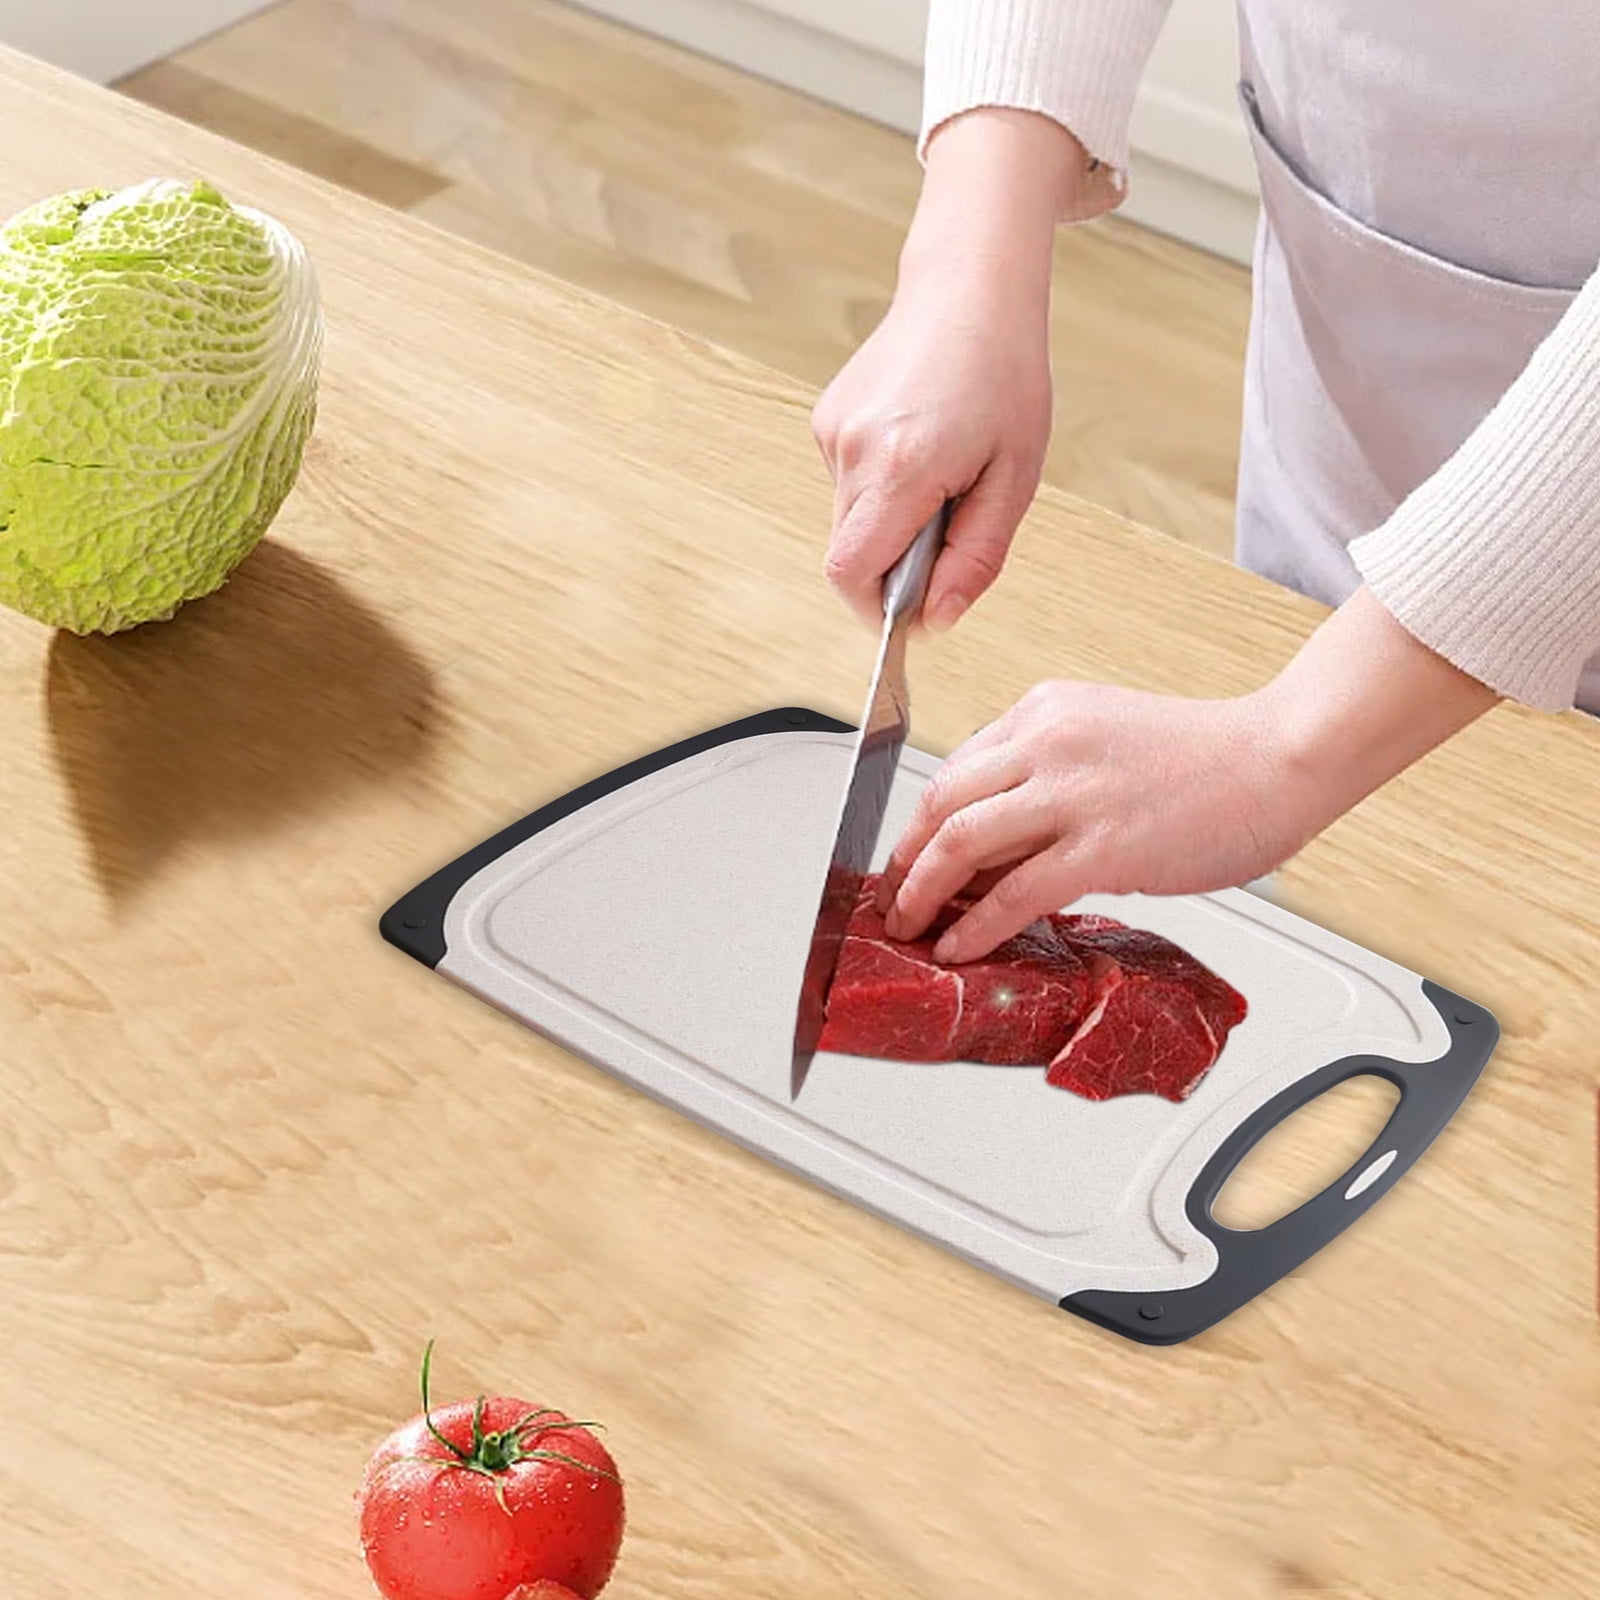 Lwithszg Cutting Boards for Kitchen, Safe Plastic Chopping Board Non-Slip Feet and Deep Drip Juice Groove, Easy Grip Handle, BPA Free, Non-Porous